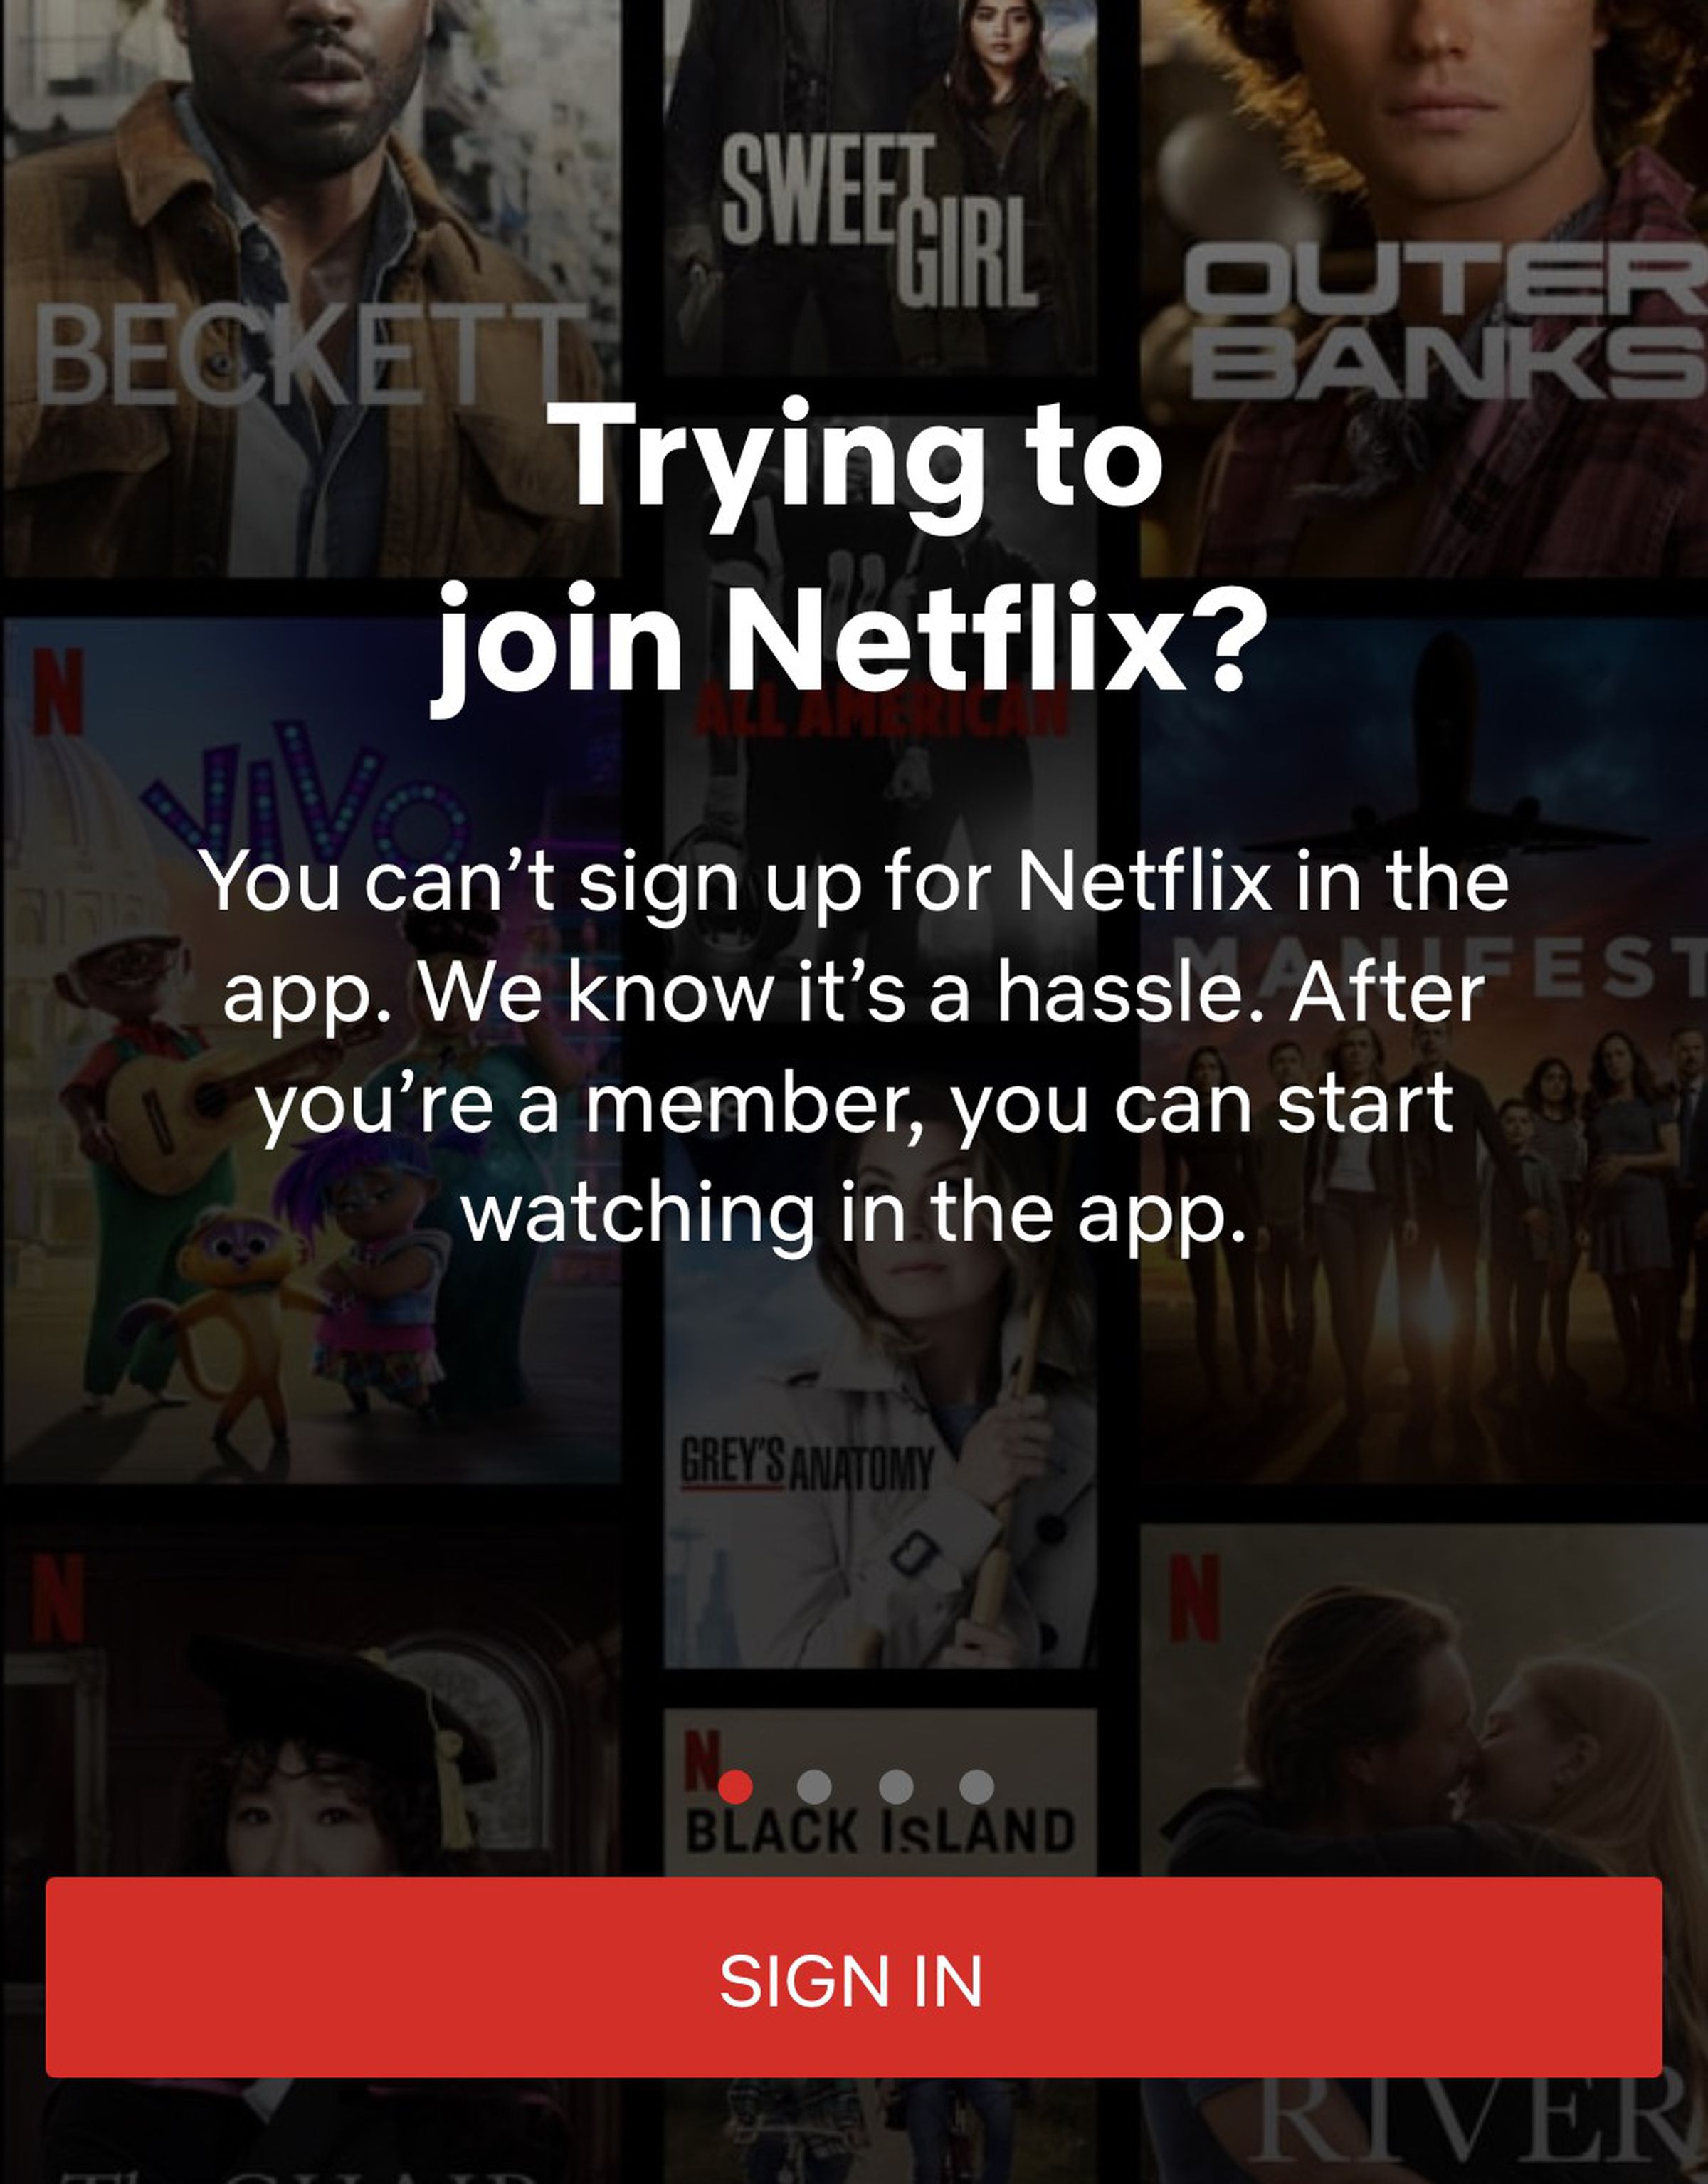 The message that greets you when opening the Netflix app on iOS.